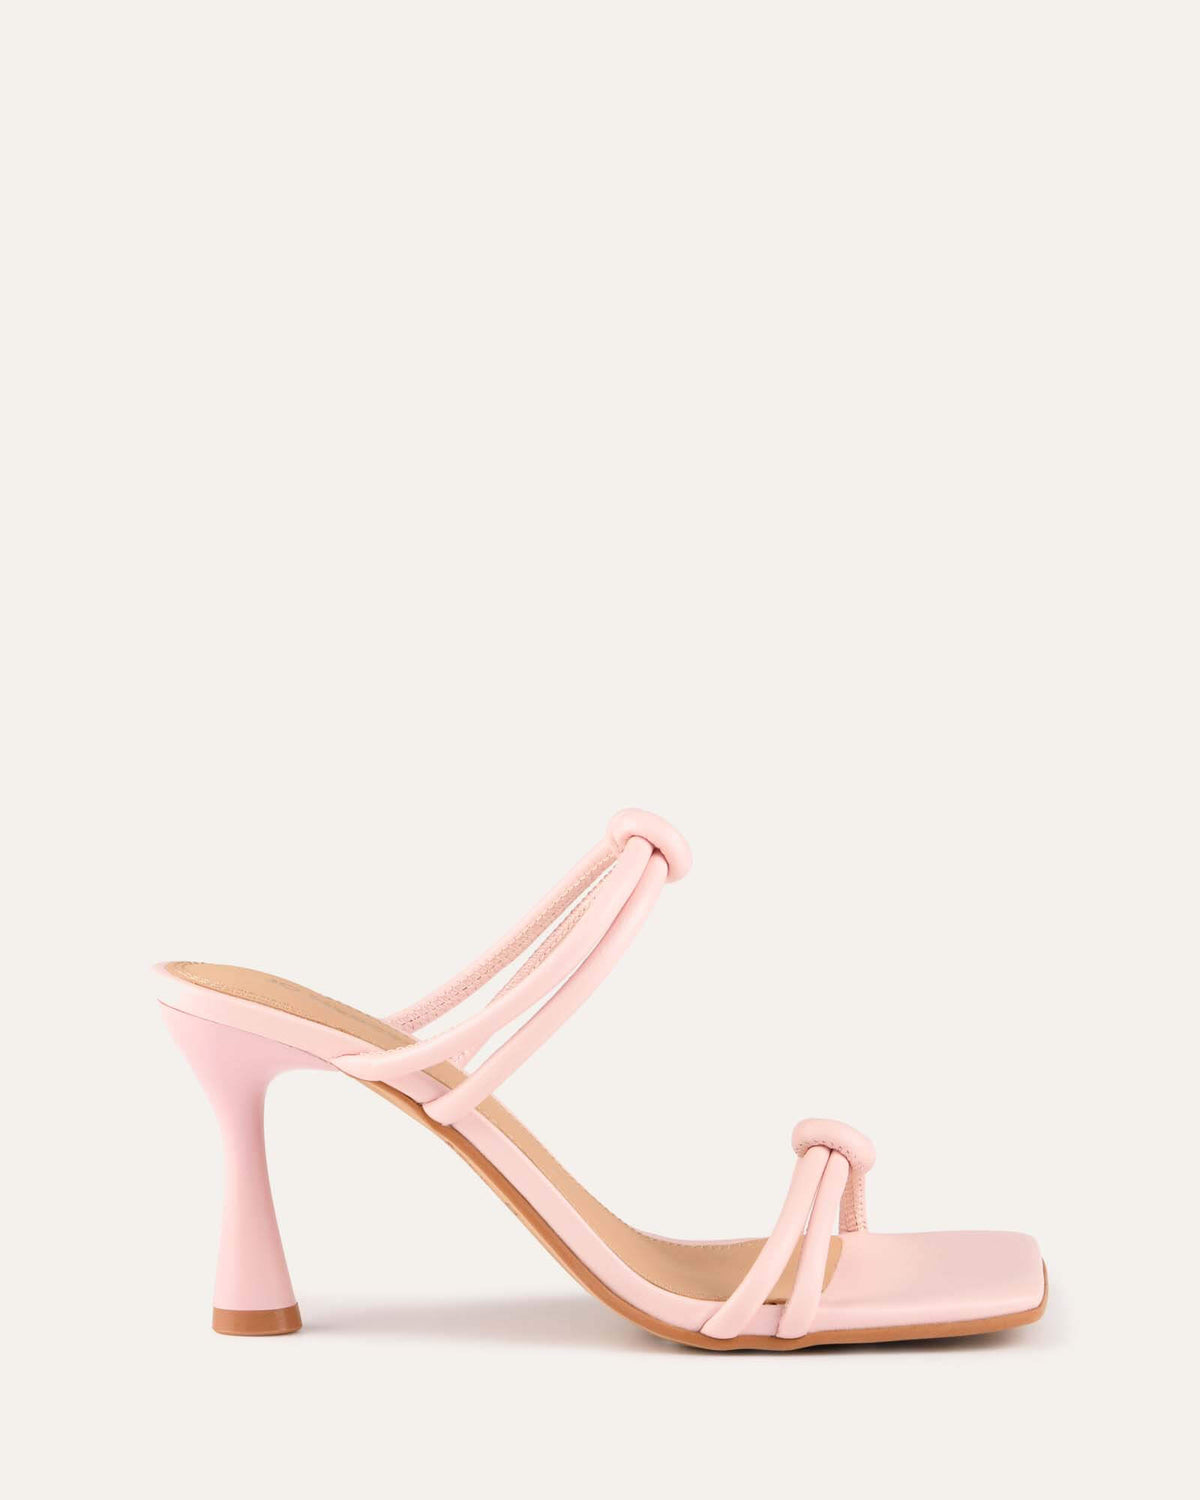 HARLOW HIGH HEEL SANDALS SOFT PINK LEATHER